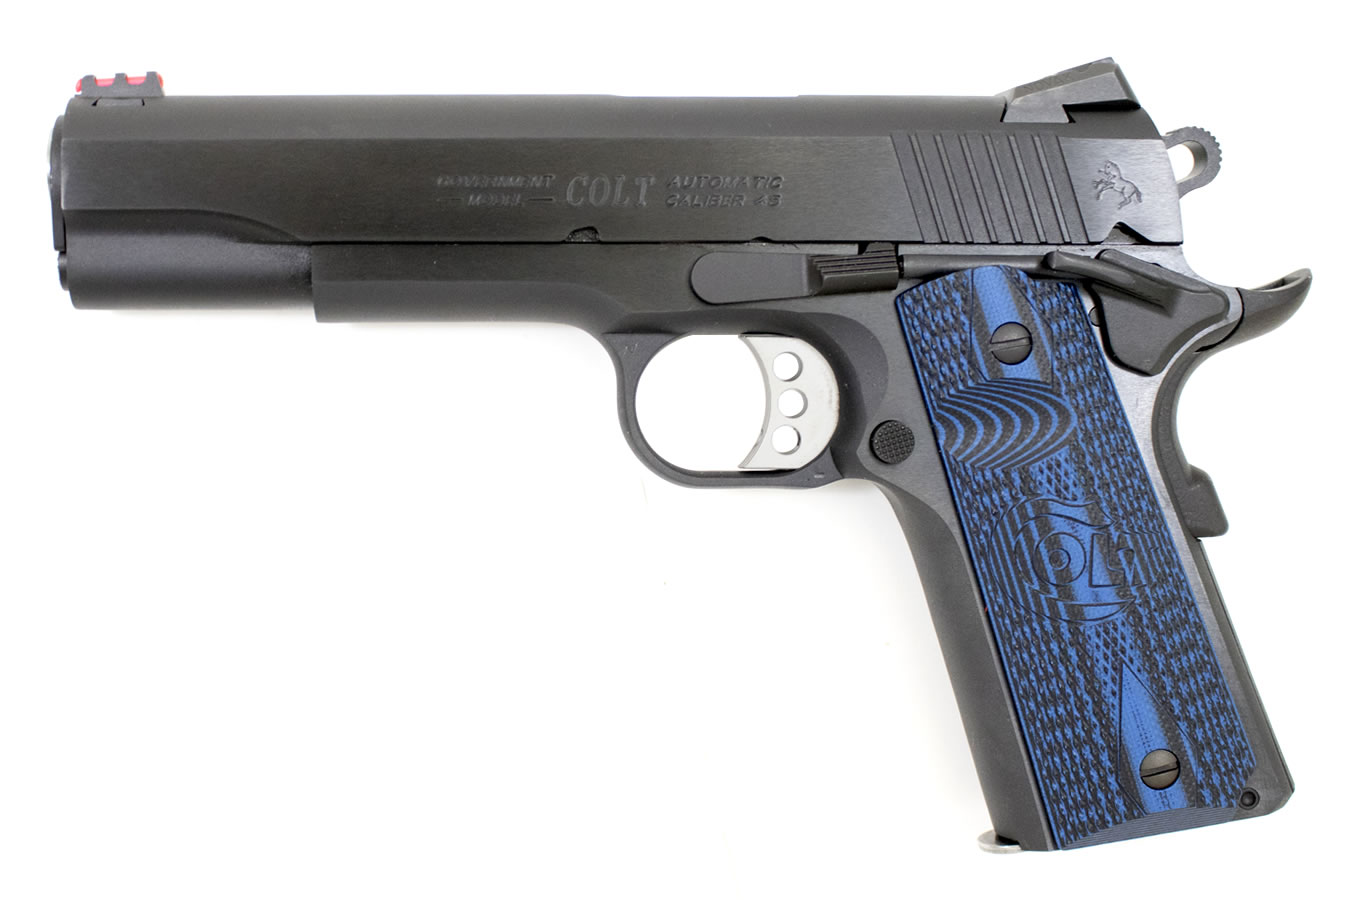 No. 19 Best Selling: COLT 1911 SERIES 70 COMPETITION 45 ACP